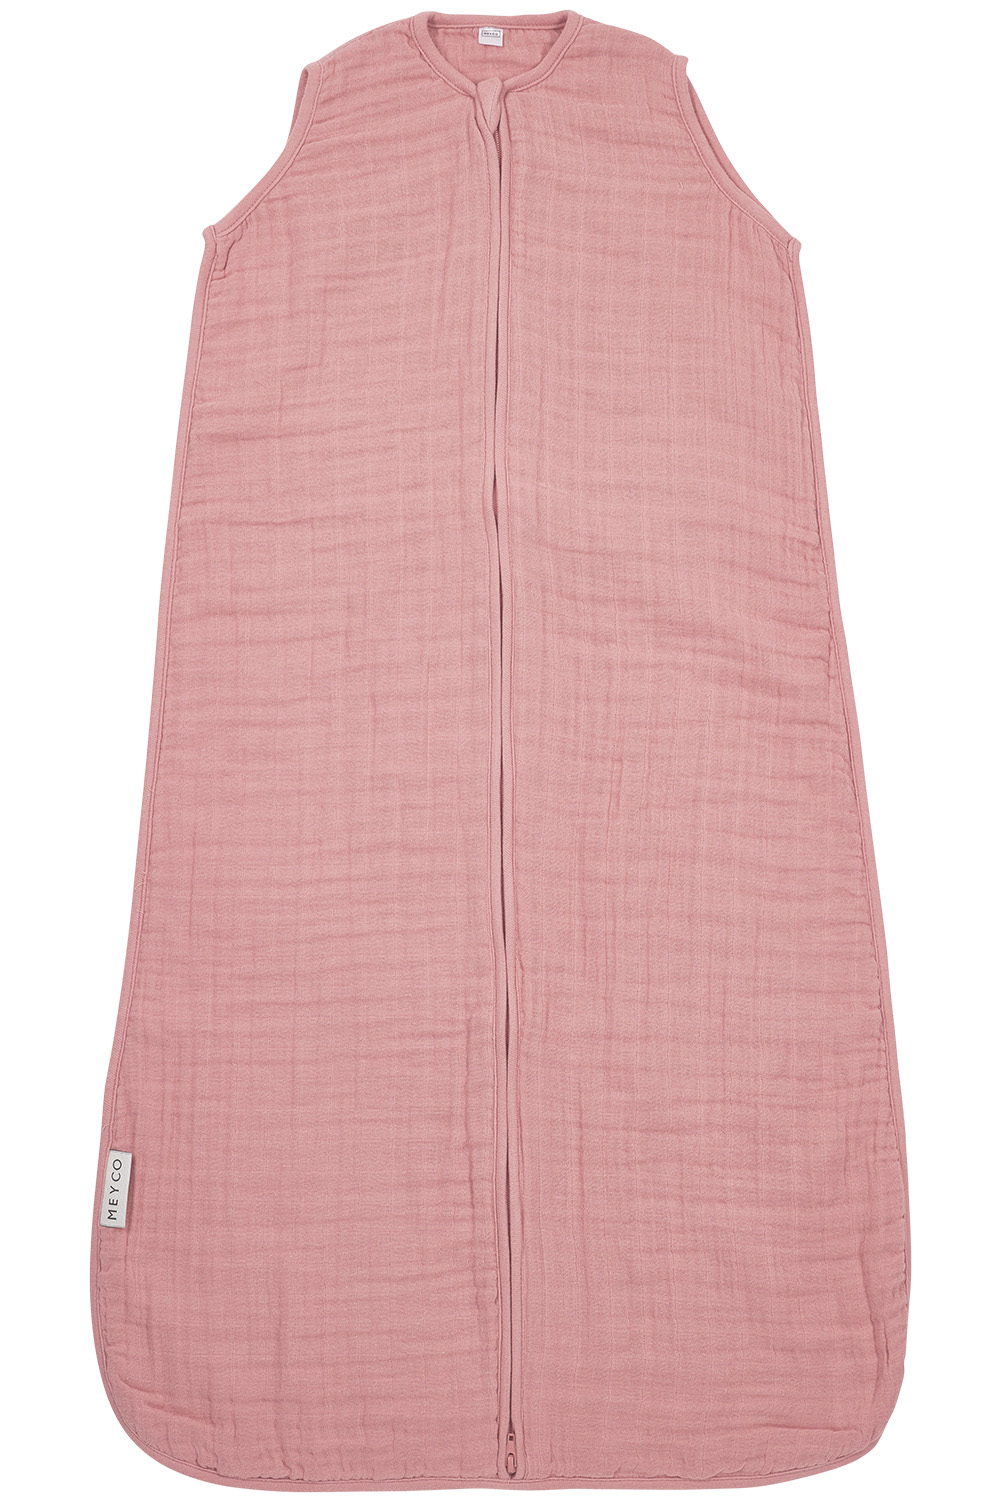 Schlafsack pre-washed musselin Uni - old pink - 60cm